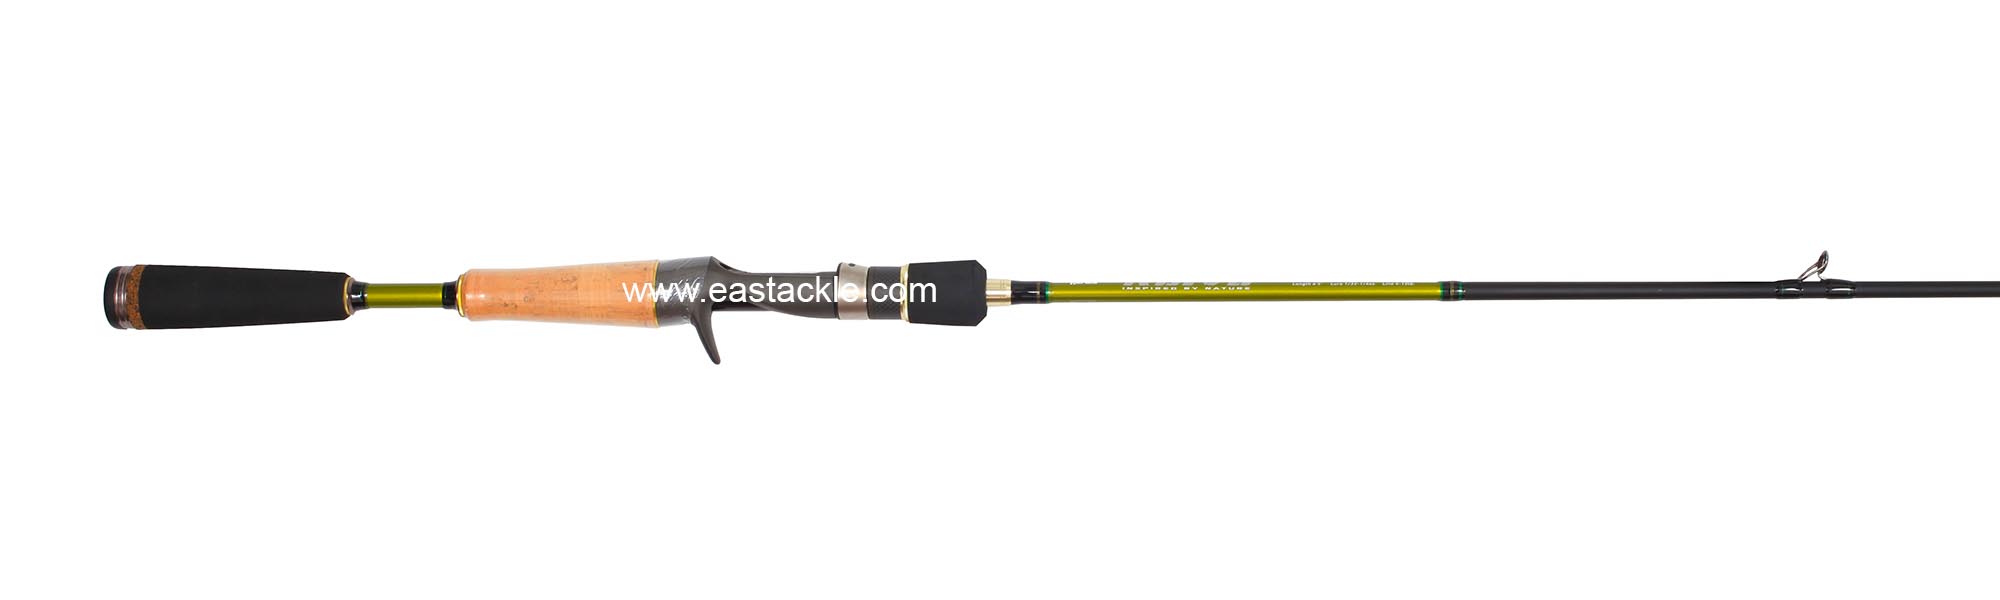 Rapala - Koivu - KVC652L - Bait Casting Rod - Butt to Stripper Guide Section (Side View) | Eastackle